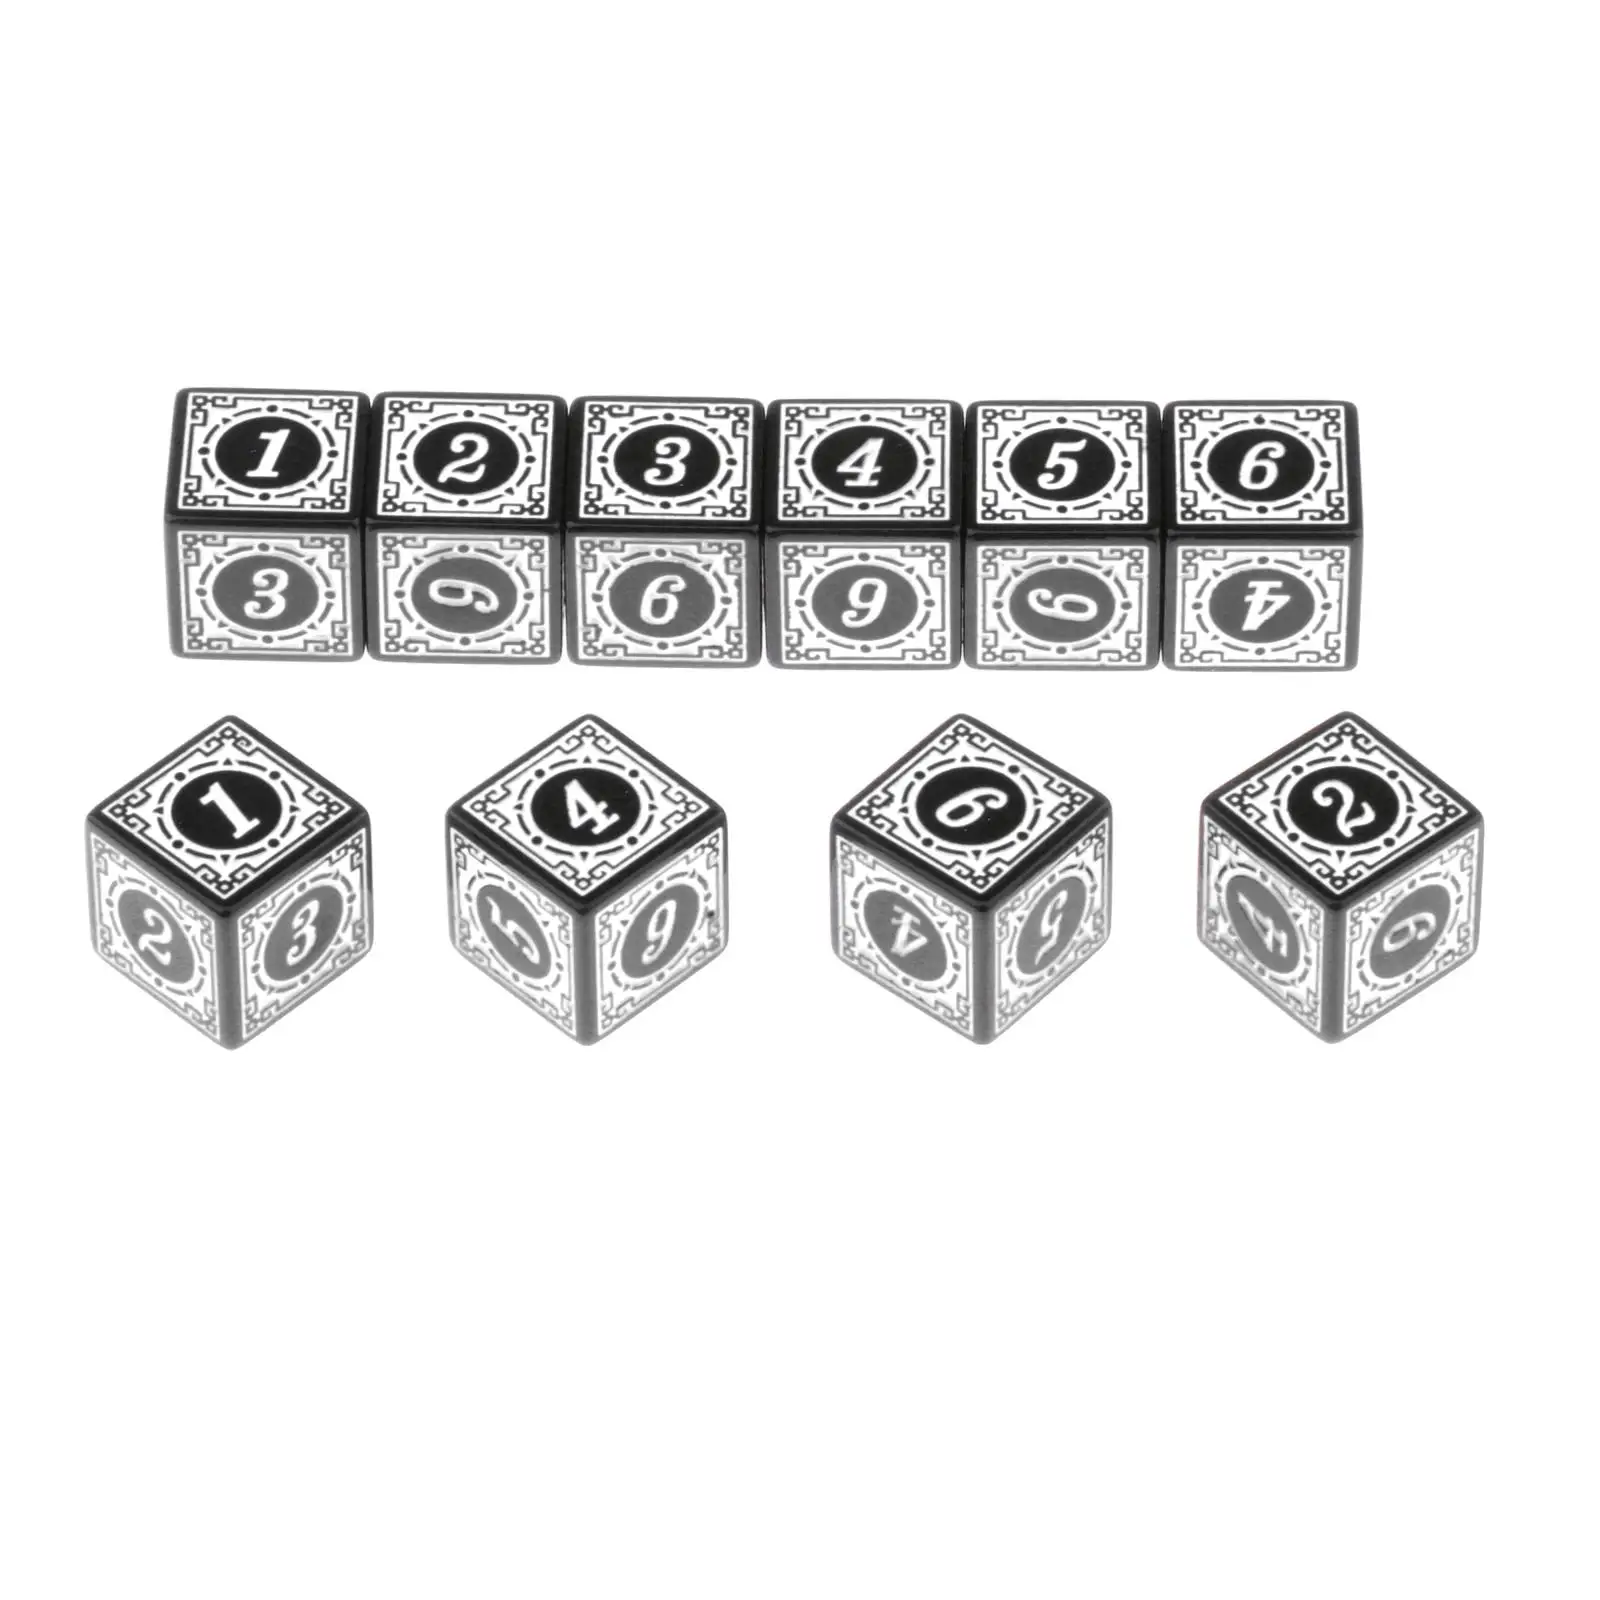 6 Sided Acrylic Dice Table Game Play Dice Games Toys Home Party Friends Family